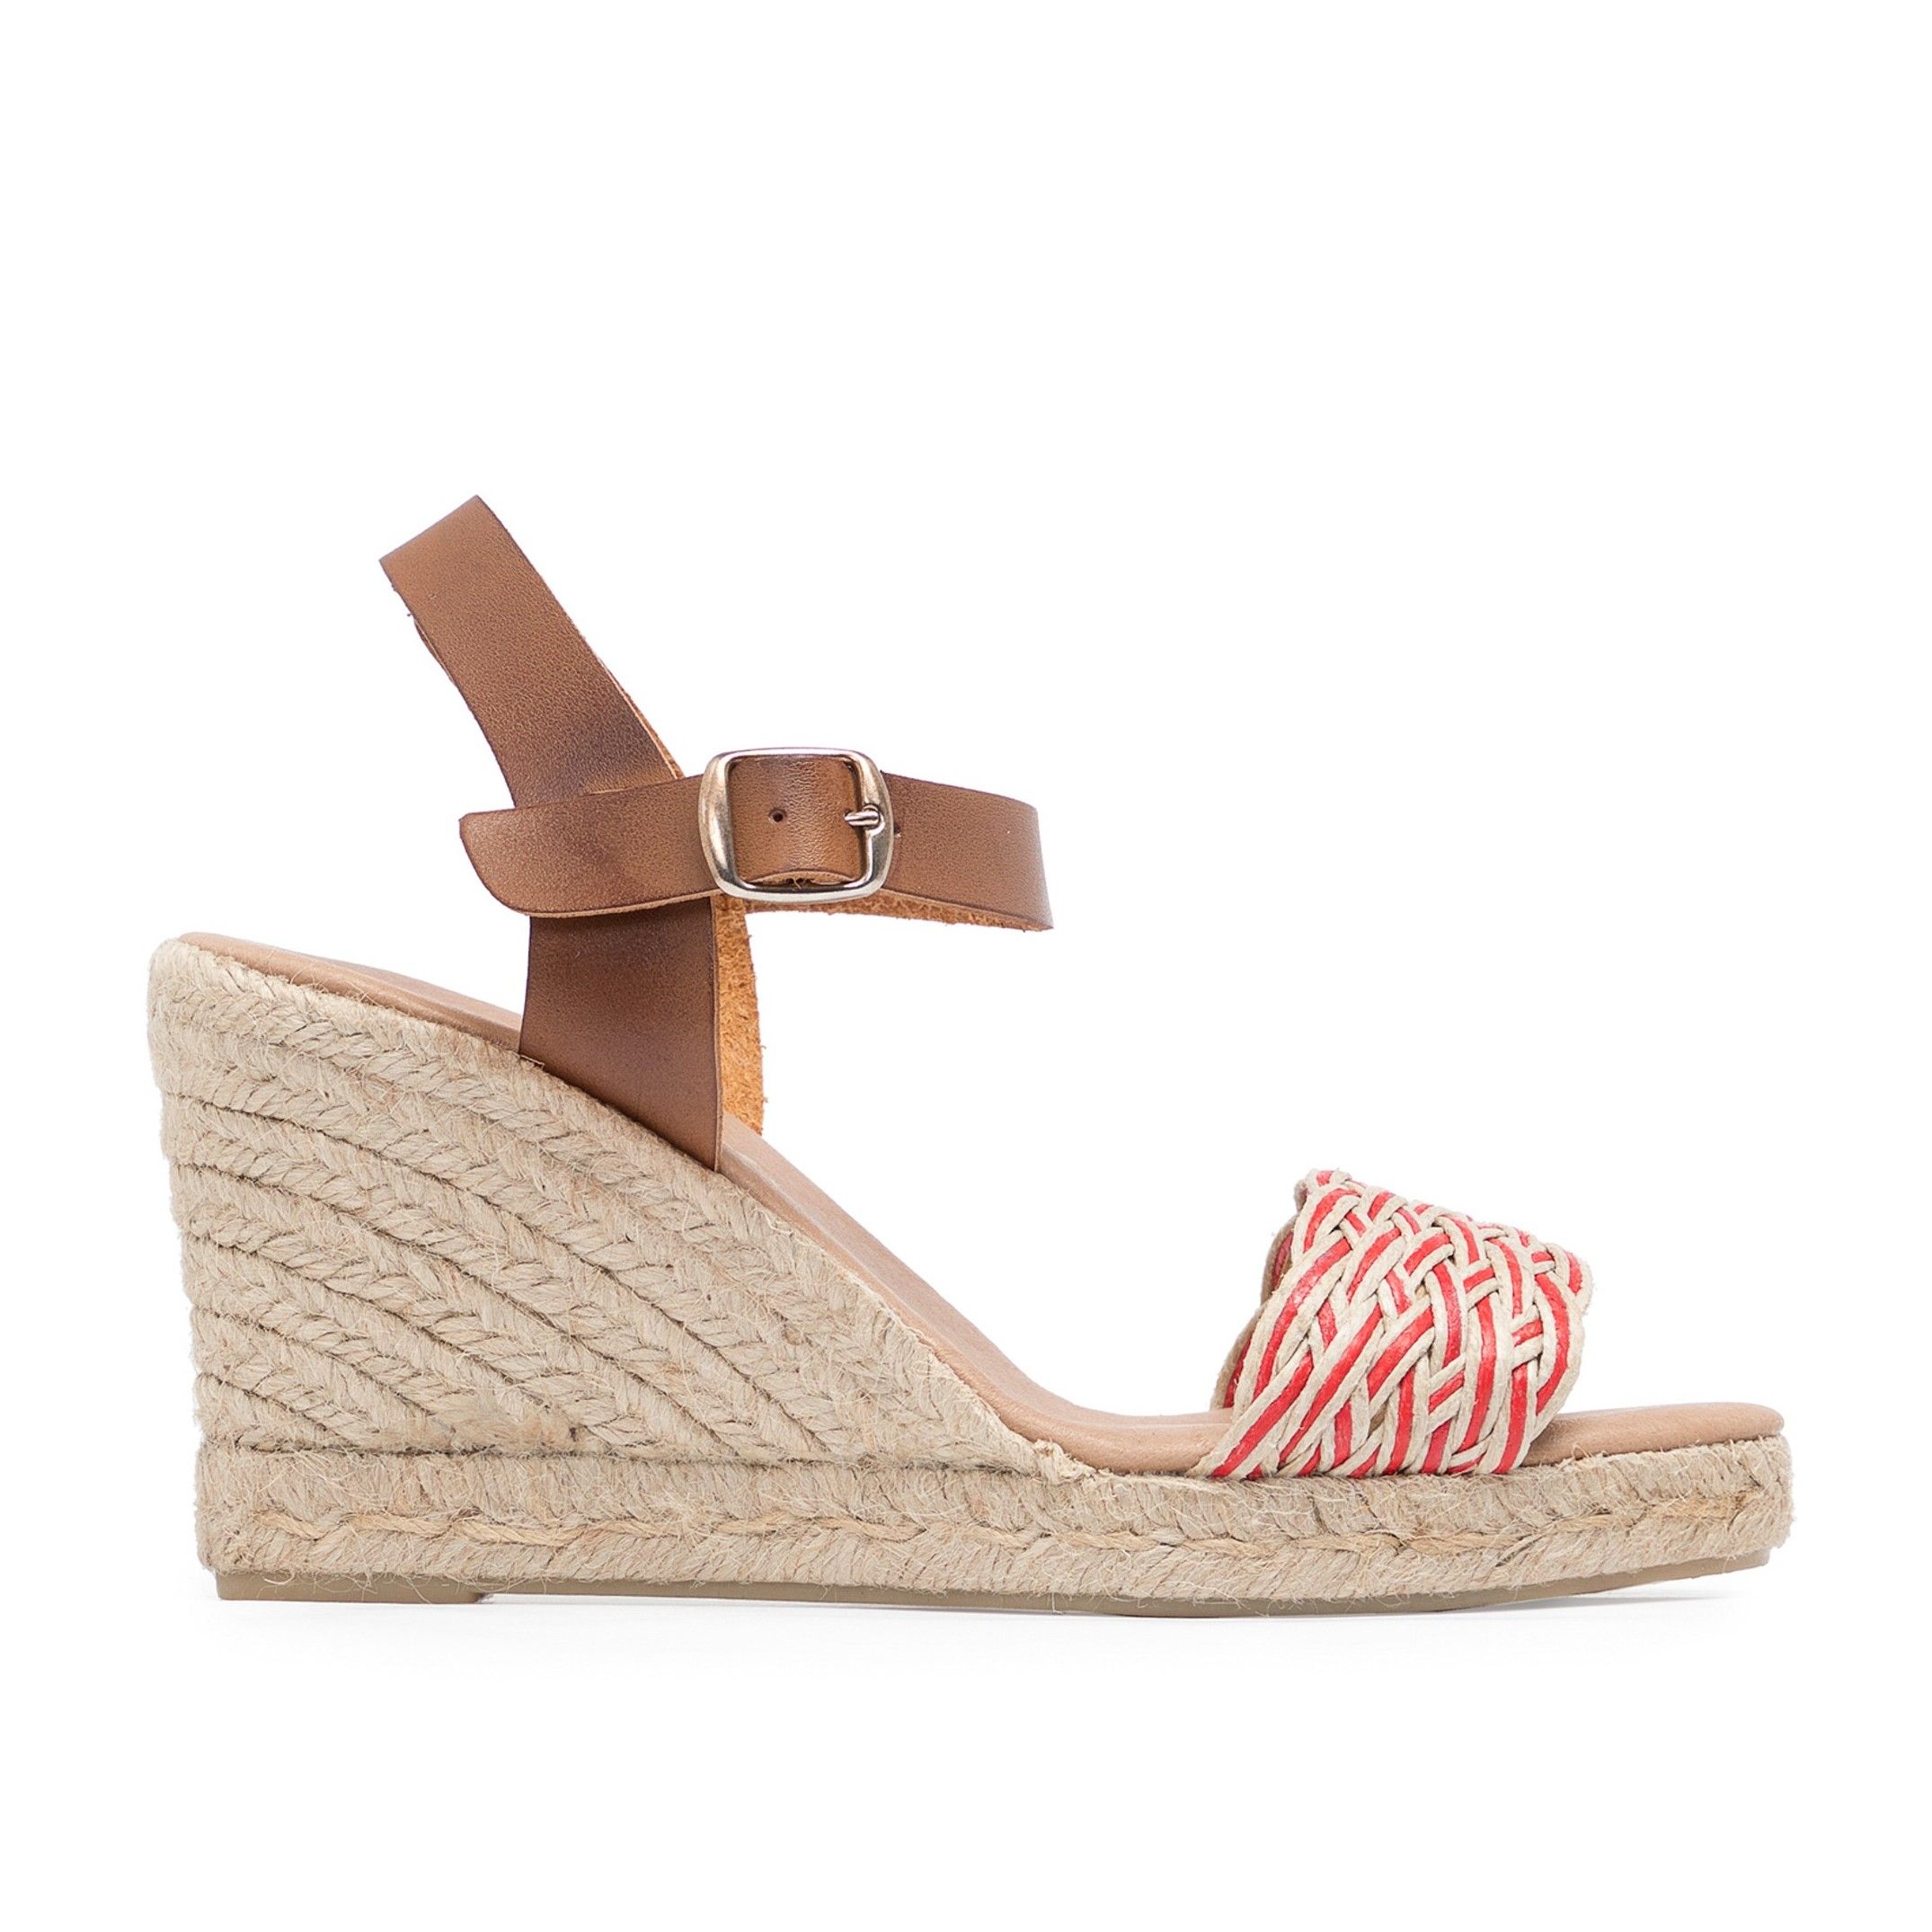 Ankle strap nappa leather sandals with seven strings. By Maria Barcelo. Upper made of cowhide leather and textile. Metal buckle closure. Inner lining and insole: pig lining. Padded sole of 0,3 cm. Sole material: synthetic. High heel: 9 cm. Platform: 2 cm. Designed and made in Spain.